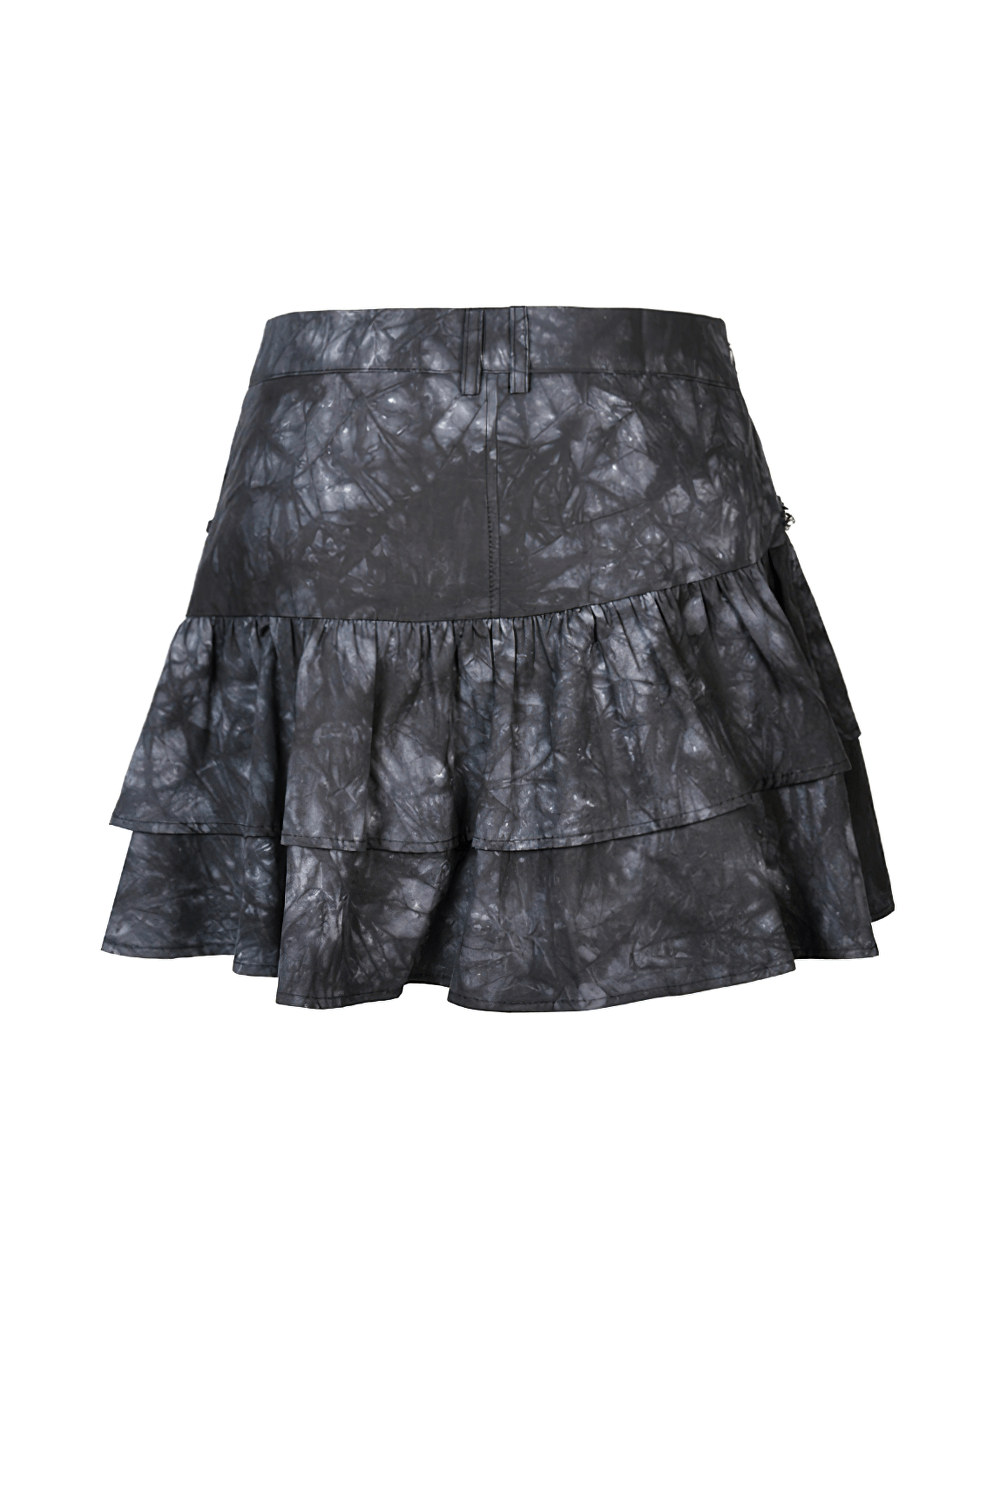 Goth Women's Mini Skirt with Ruffles and Chains